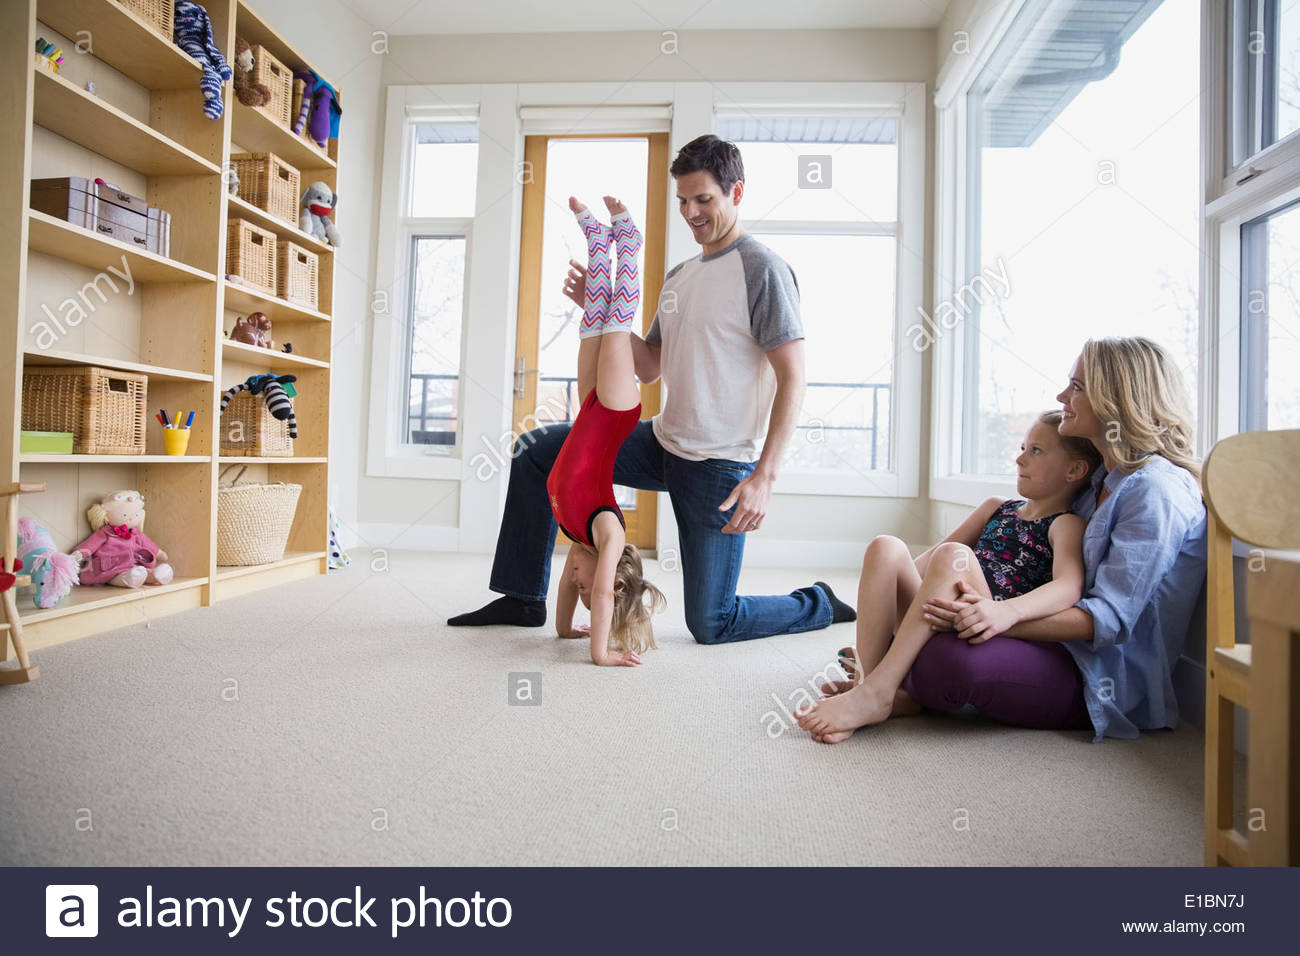 Father helping daughter do handstand in living room Stock Photo